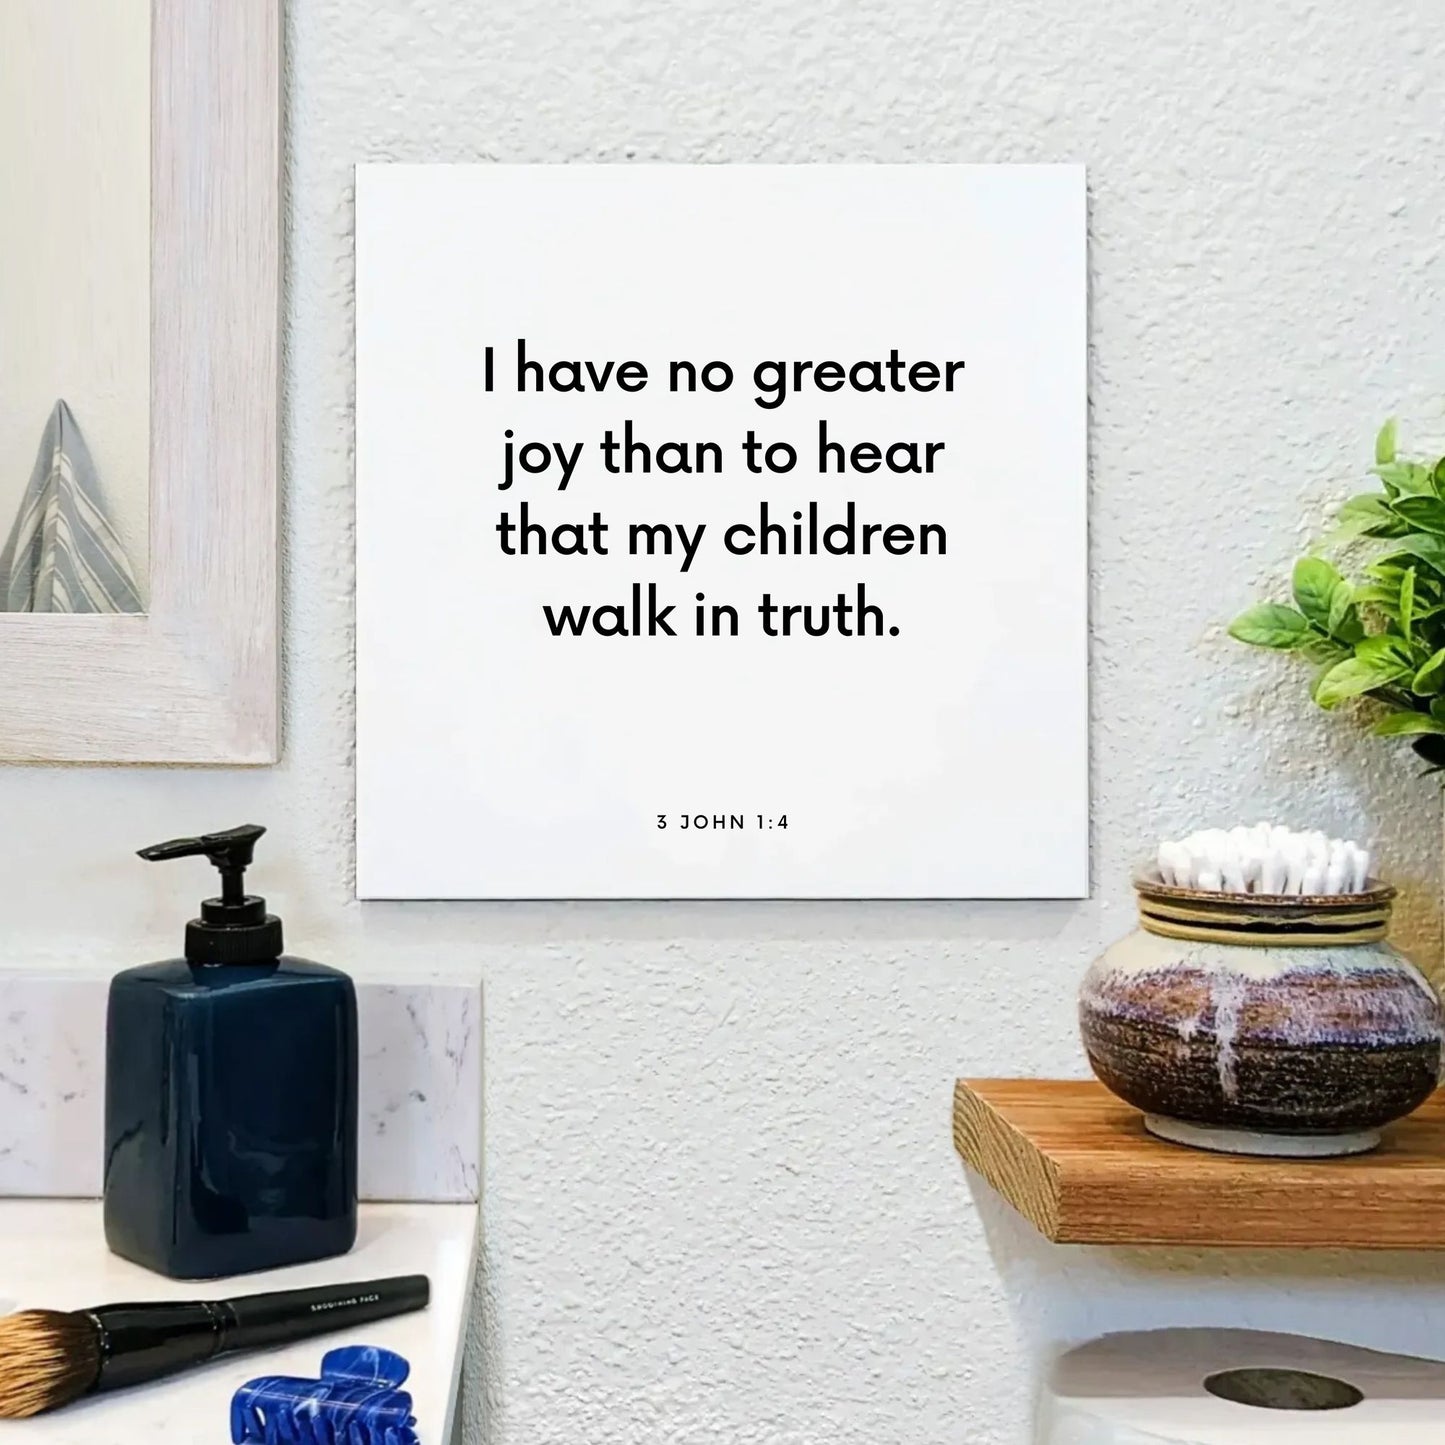 Bathroom mouting of the scripture tile for 3 John 1:4 - "No greater joy than to hear that my children walk in truth"